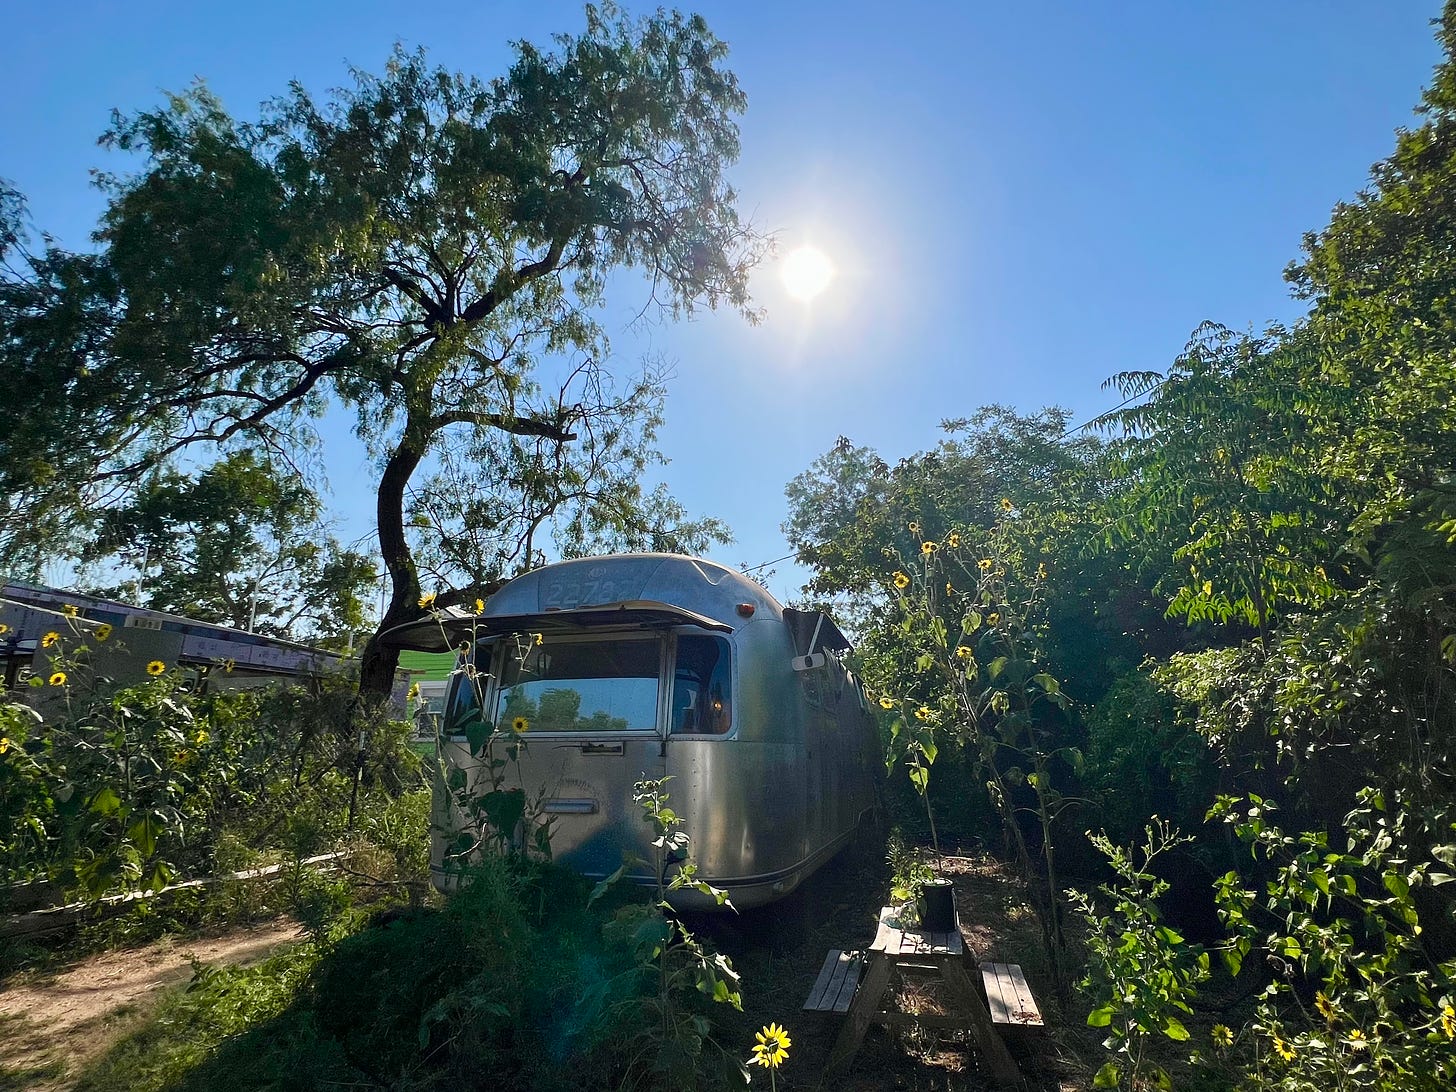 Afternoon sun over vintage Airstream